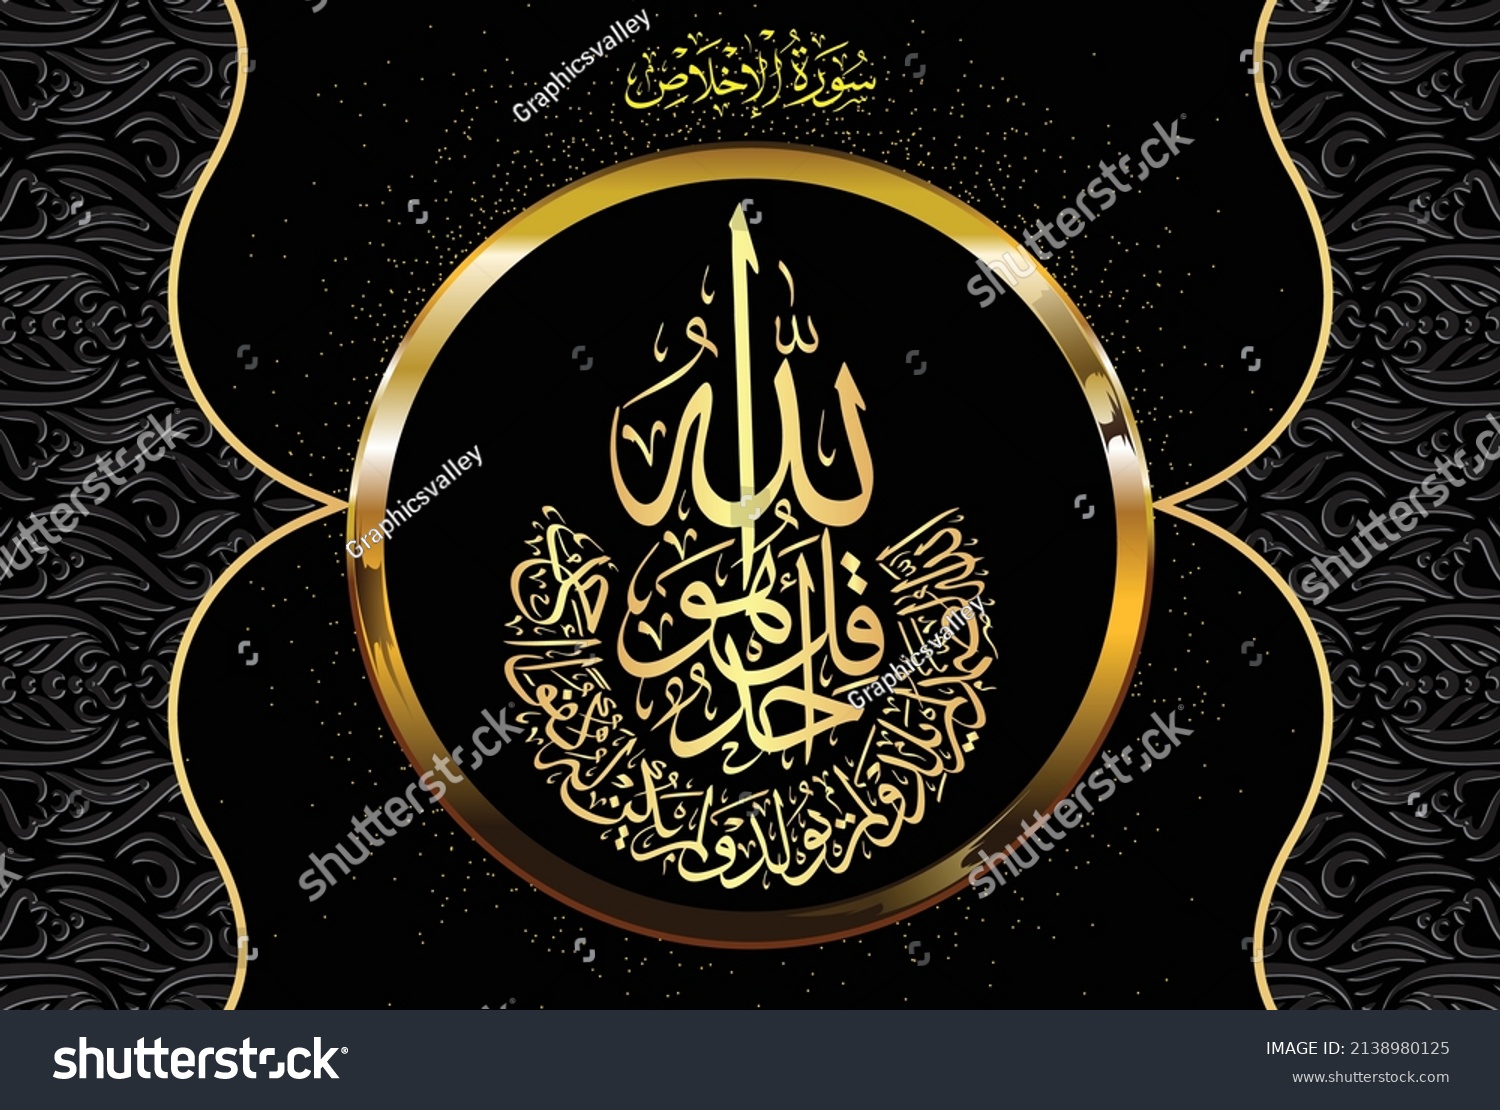 SVG of Arabic Calligraphy, verse no 1-4 from chapter Surah Al Ikhlas 112 of the Quran. Say, 